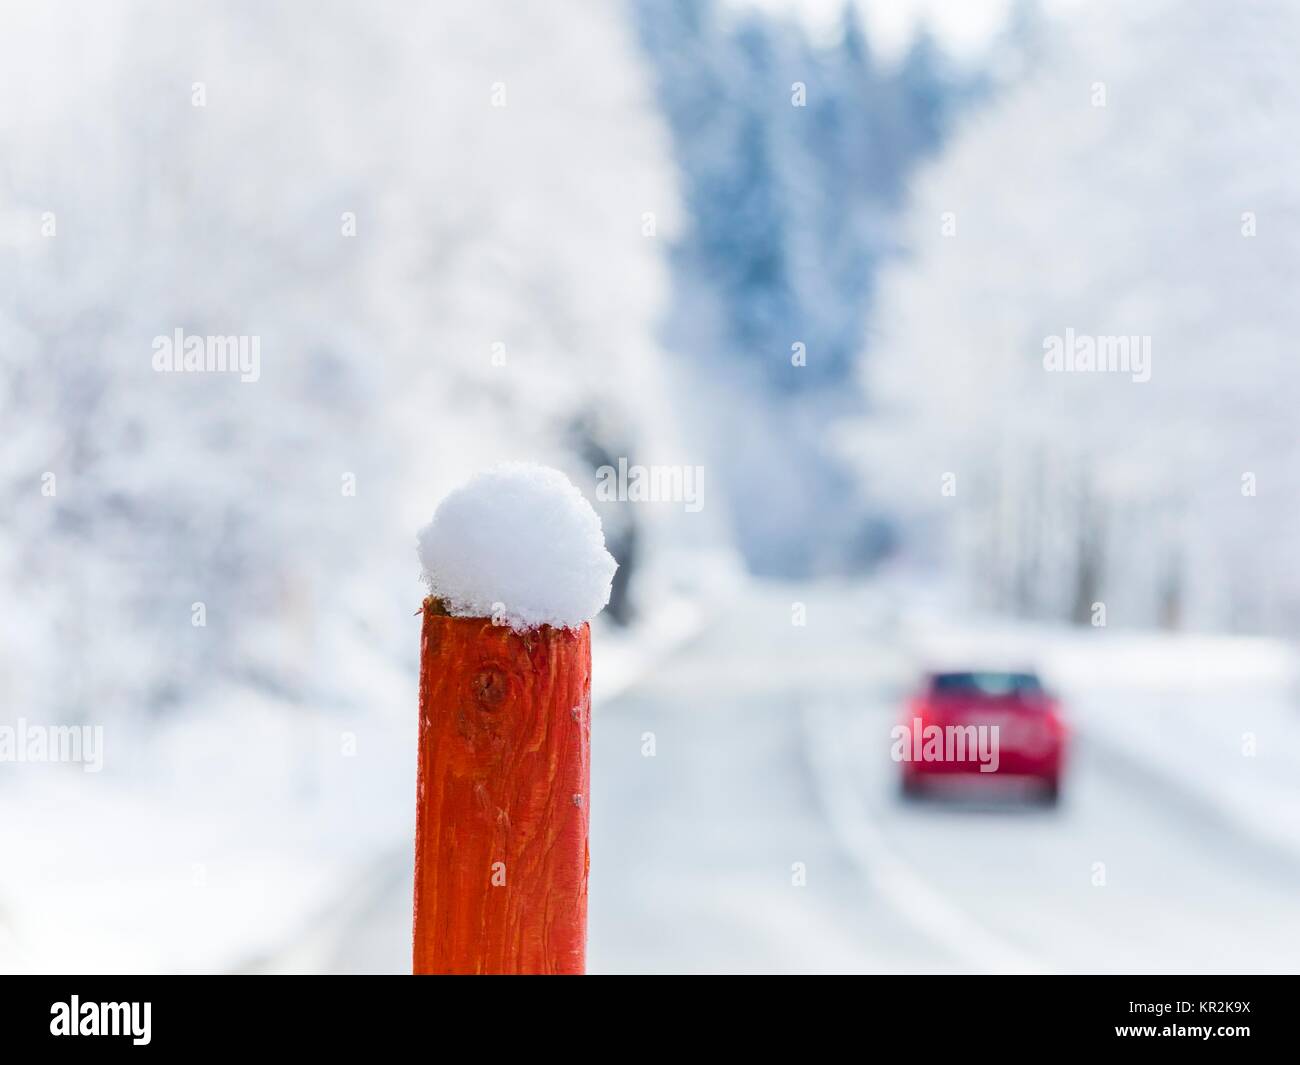 Wooden post with patch of snow on top and passing by departing Red car in background blurry snowy Winter road in country-side Stock Photo